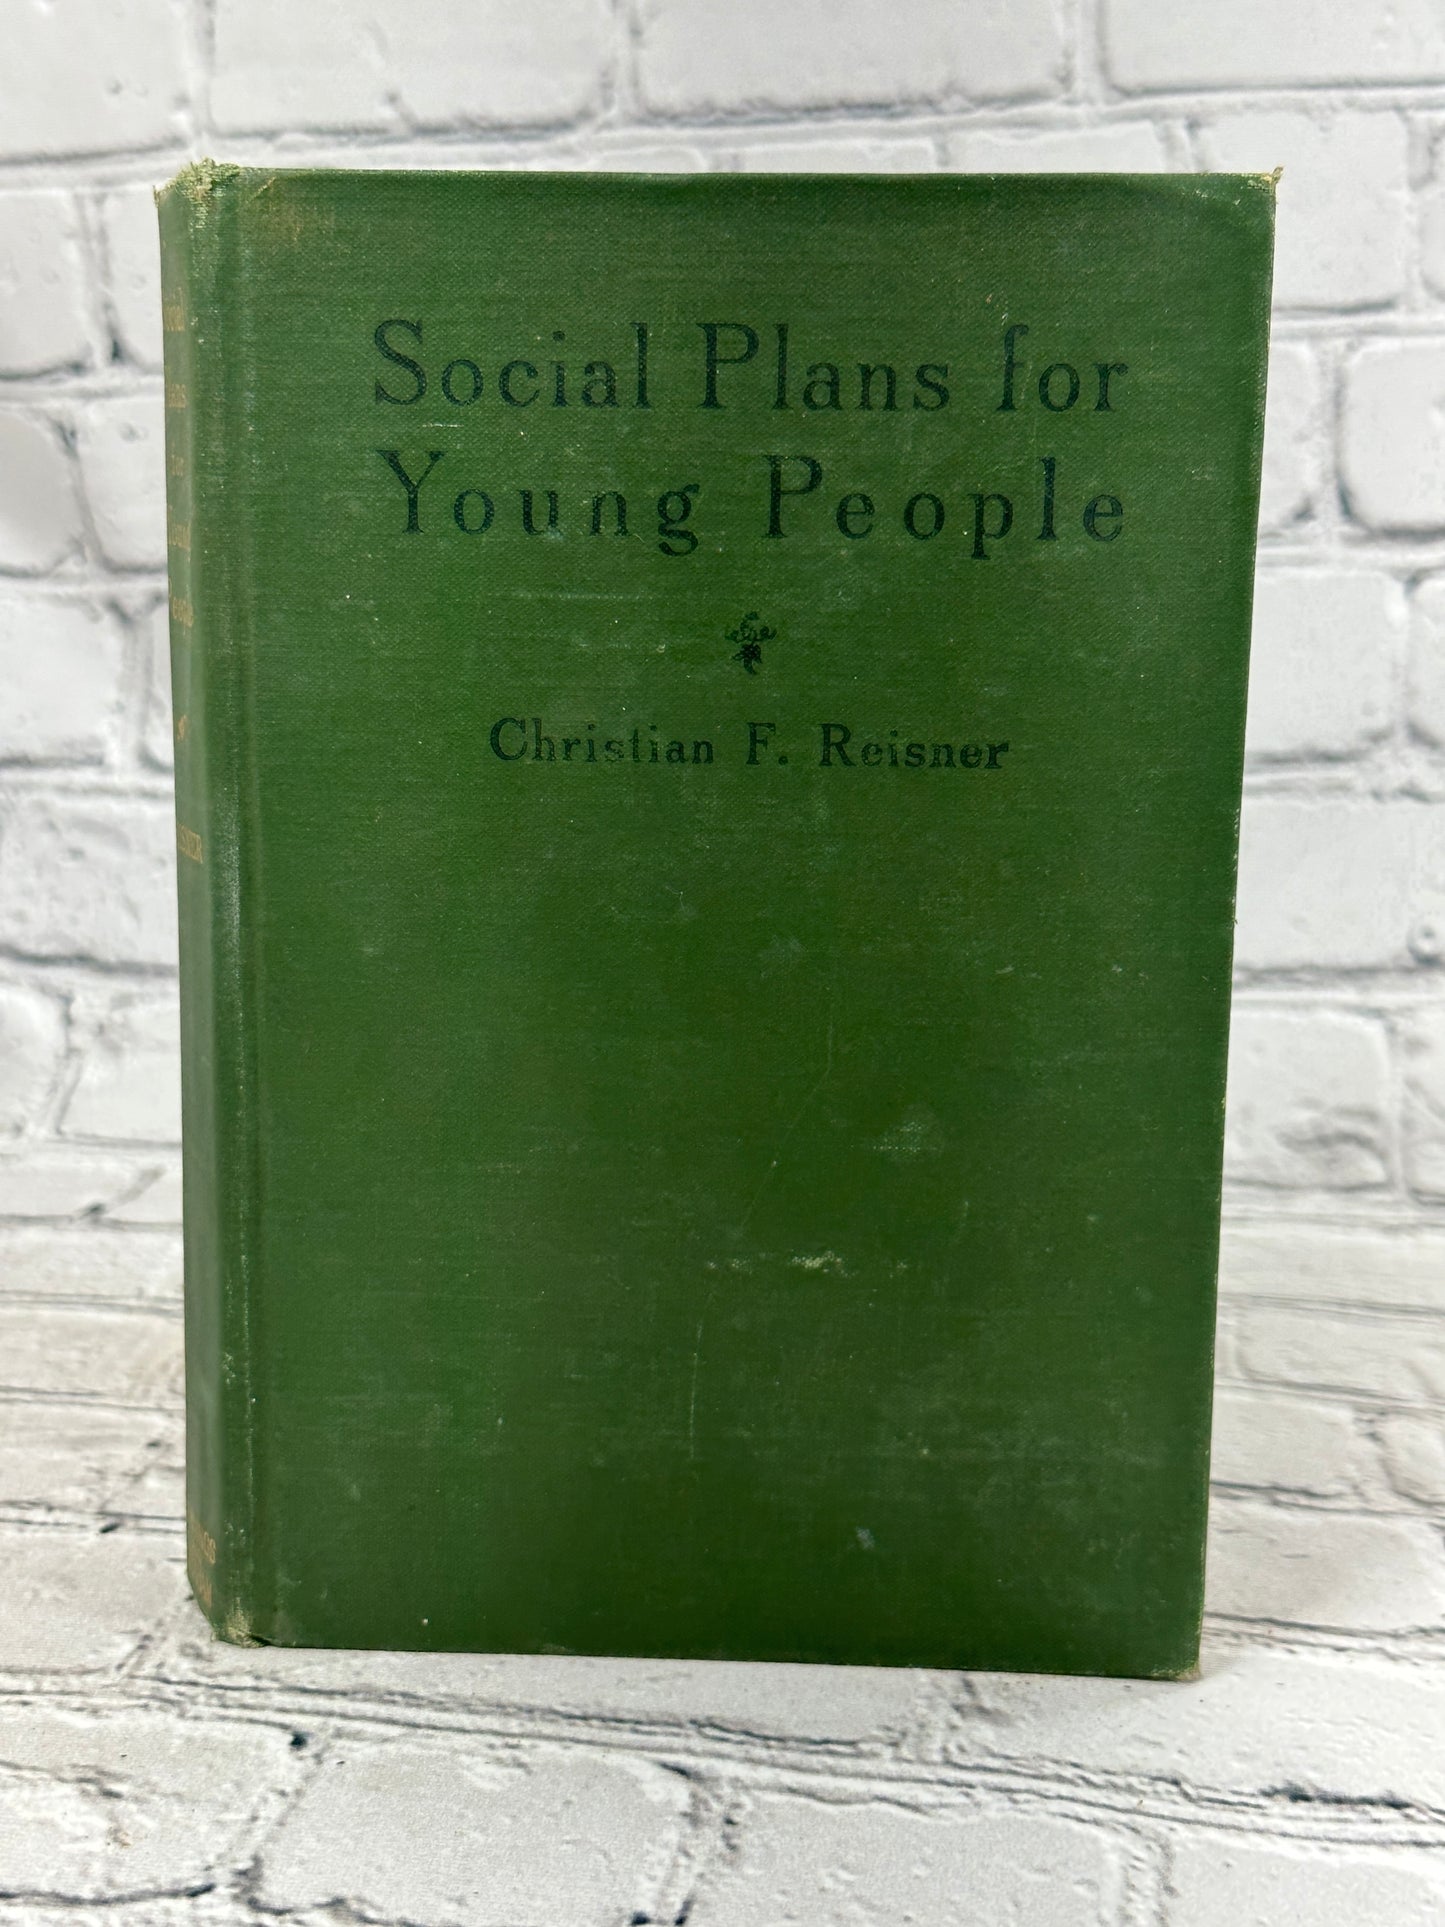 Social Plans for Young People by Christian F. Reisner [1908]